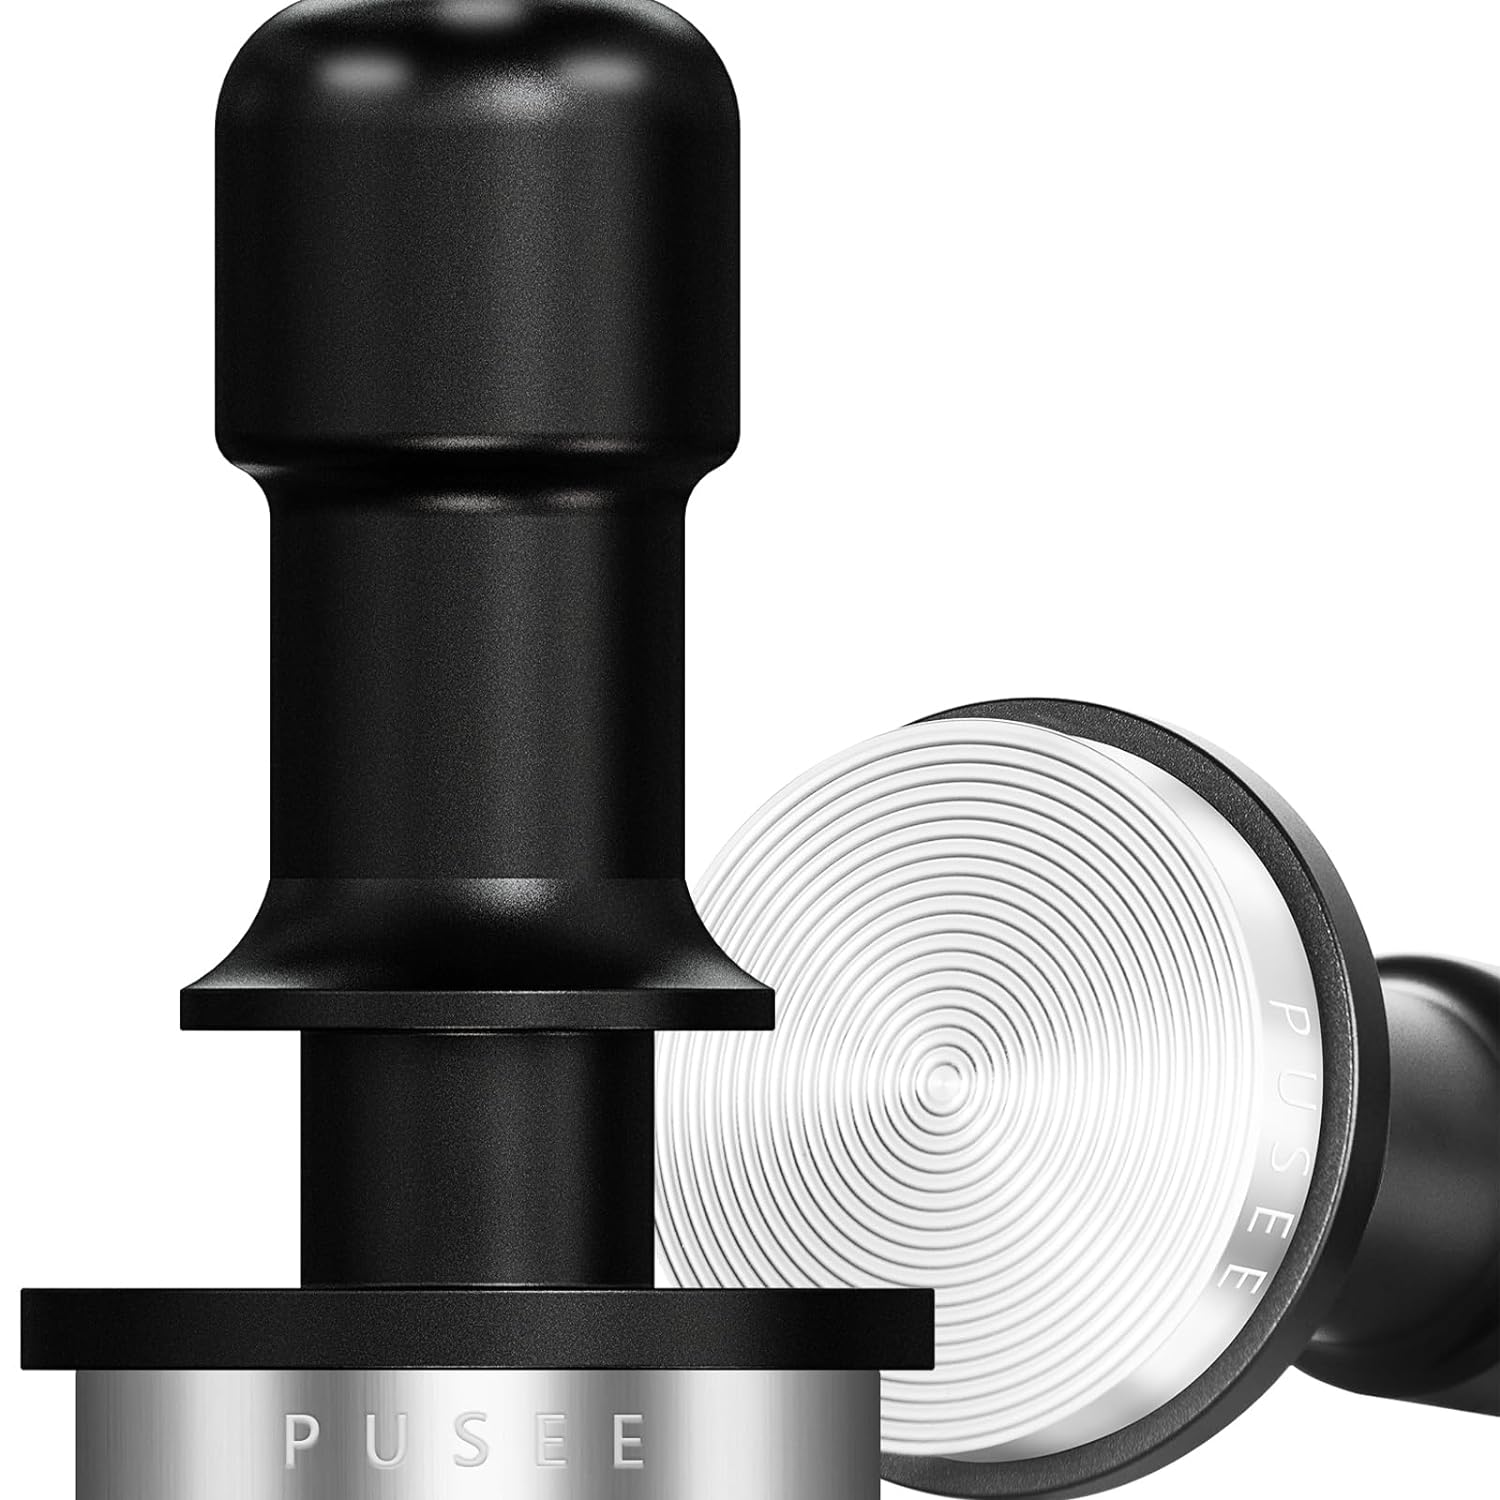 PUSEE 45mm Espresso Coffee Tamper,Premium Calibrated Espresso Tamper 30lb Coffee Tamper with Spring Loaded,100% Stainless Steel Ground Tamper for Barista Home Coffee Espresso Accessories Upgrade3.0